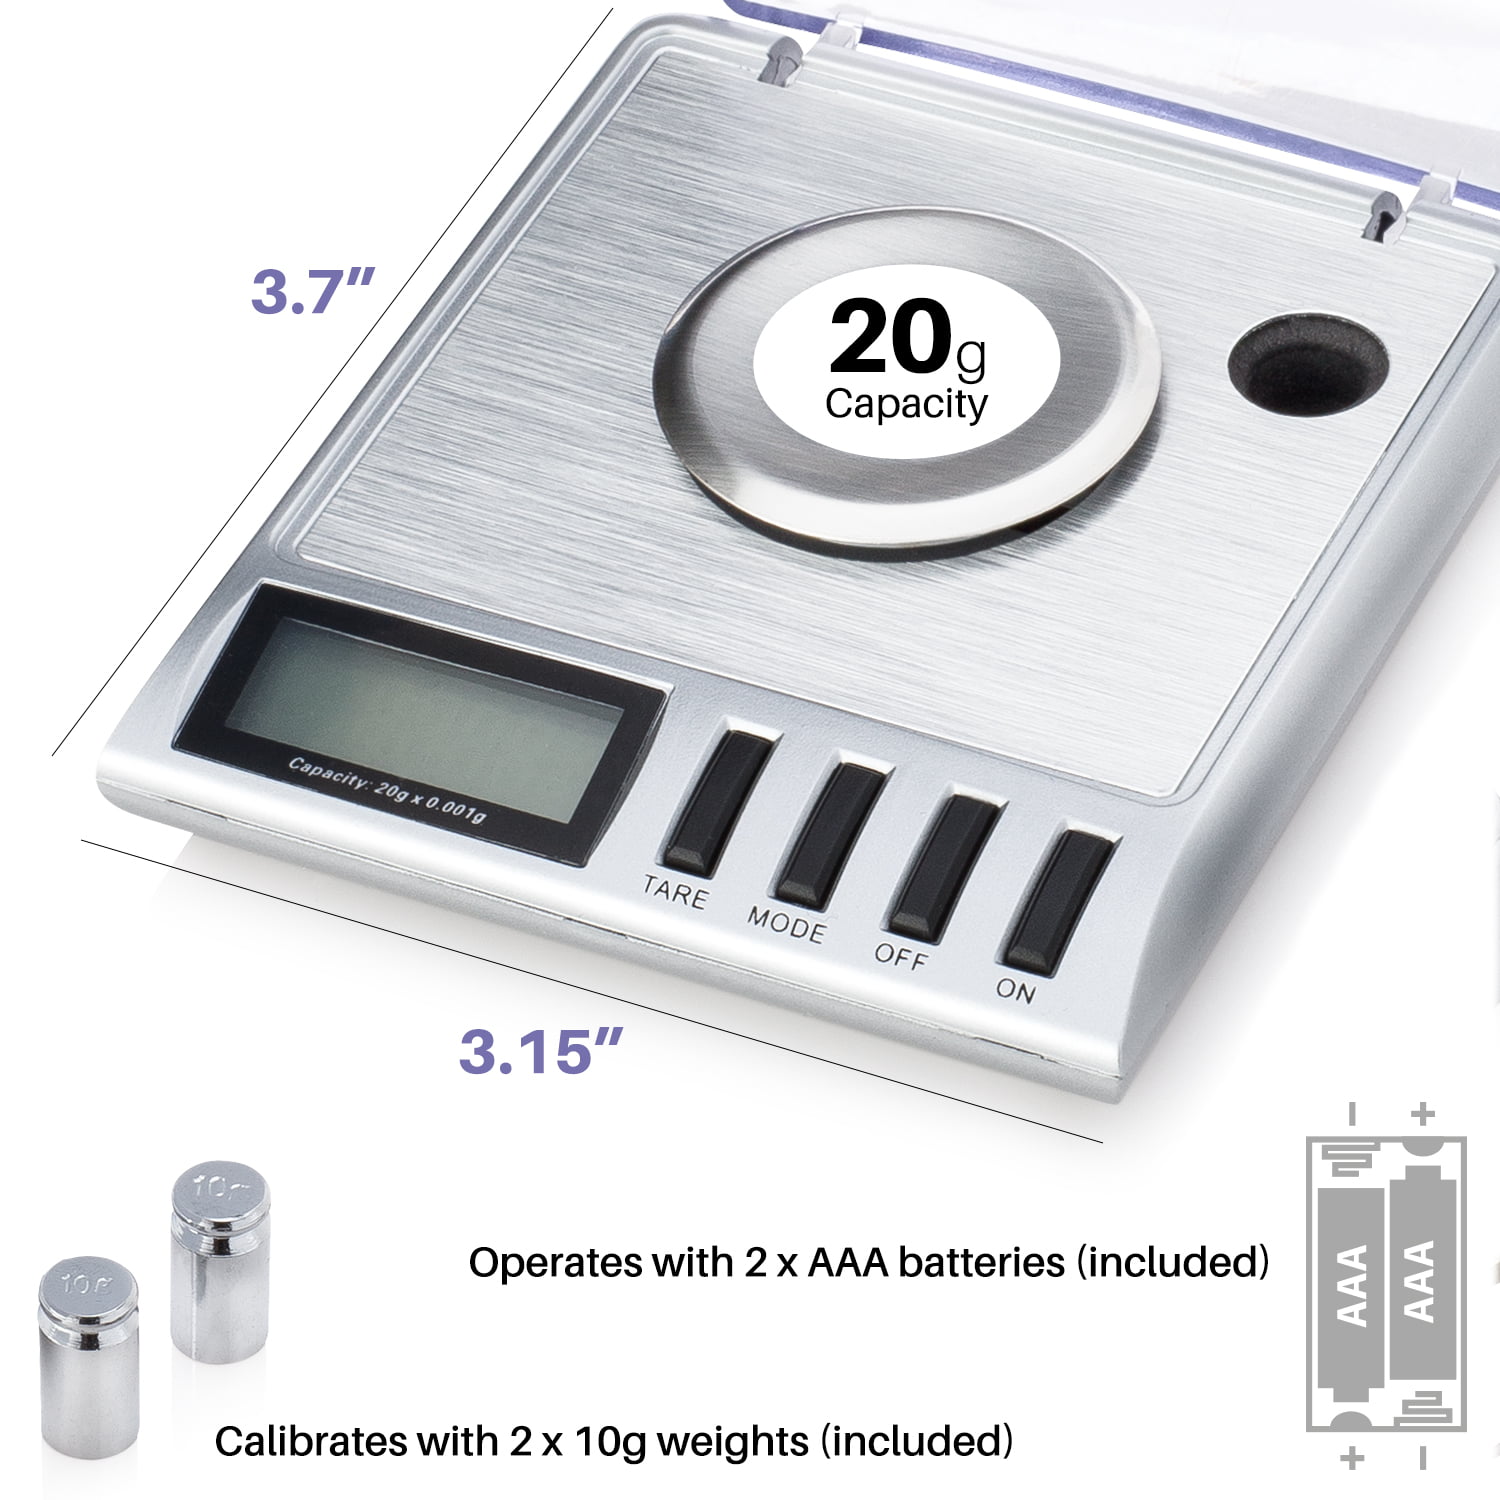 New Cannabis Scales Have 10, 20 or 50 Milligram Precision. From: Detecto